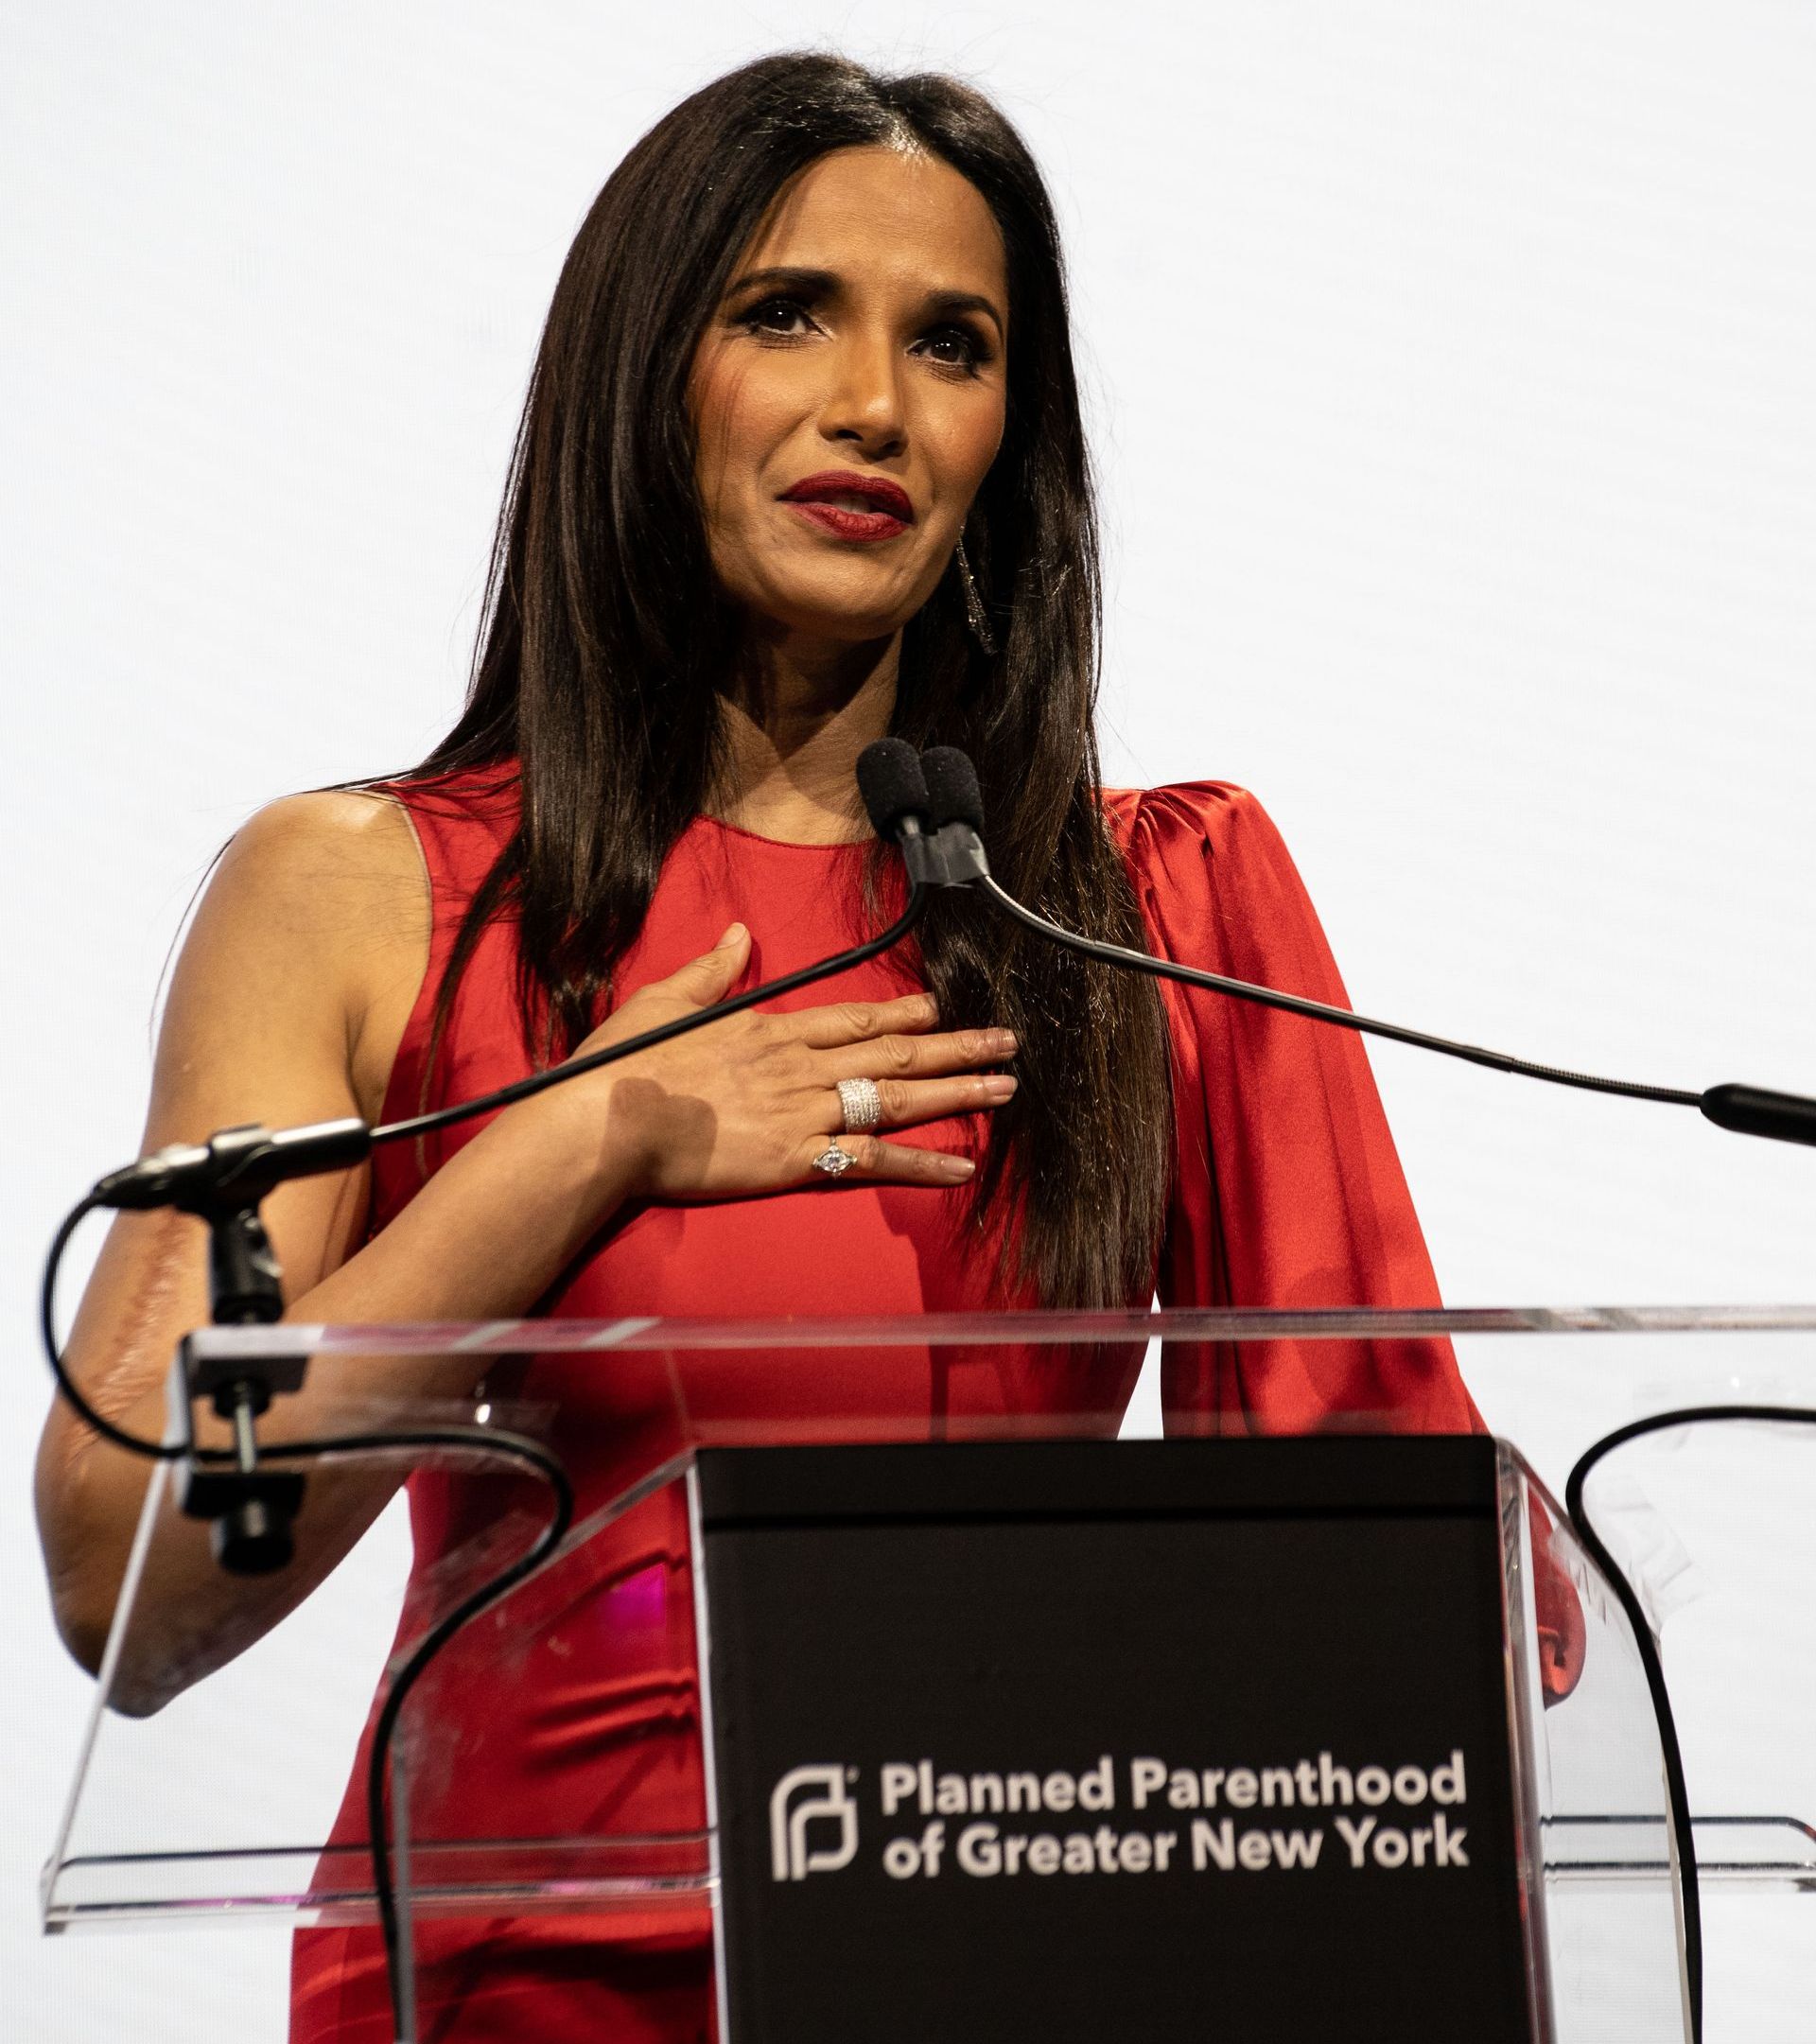 Planned Parenthood Event at The Glasshouse - photo of a woman in a red dress is standing at a podium speaking into a microphone .